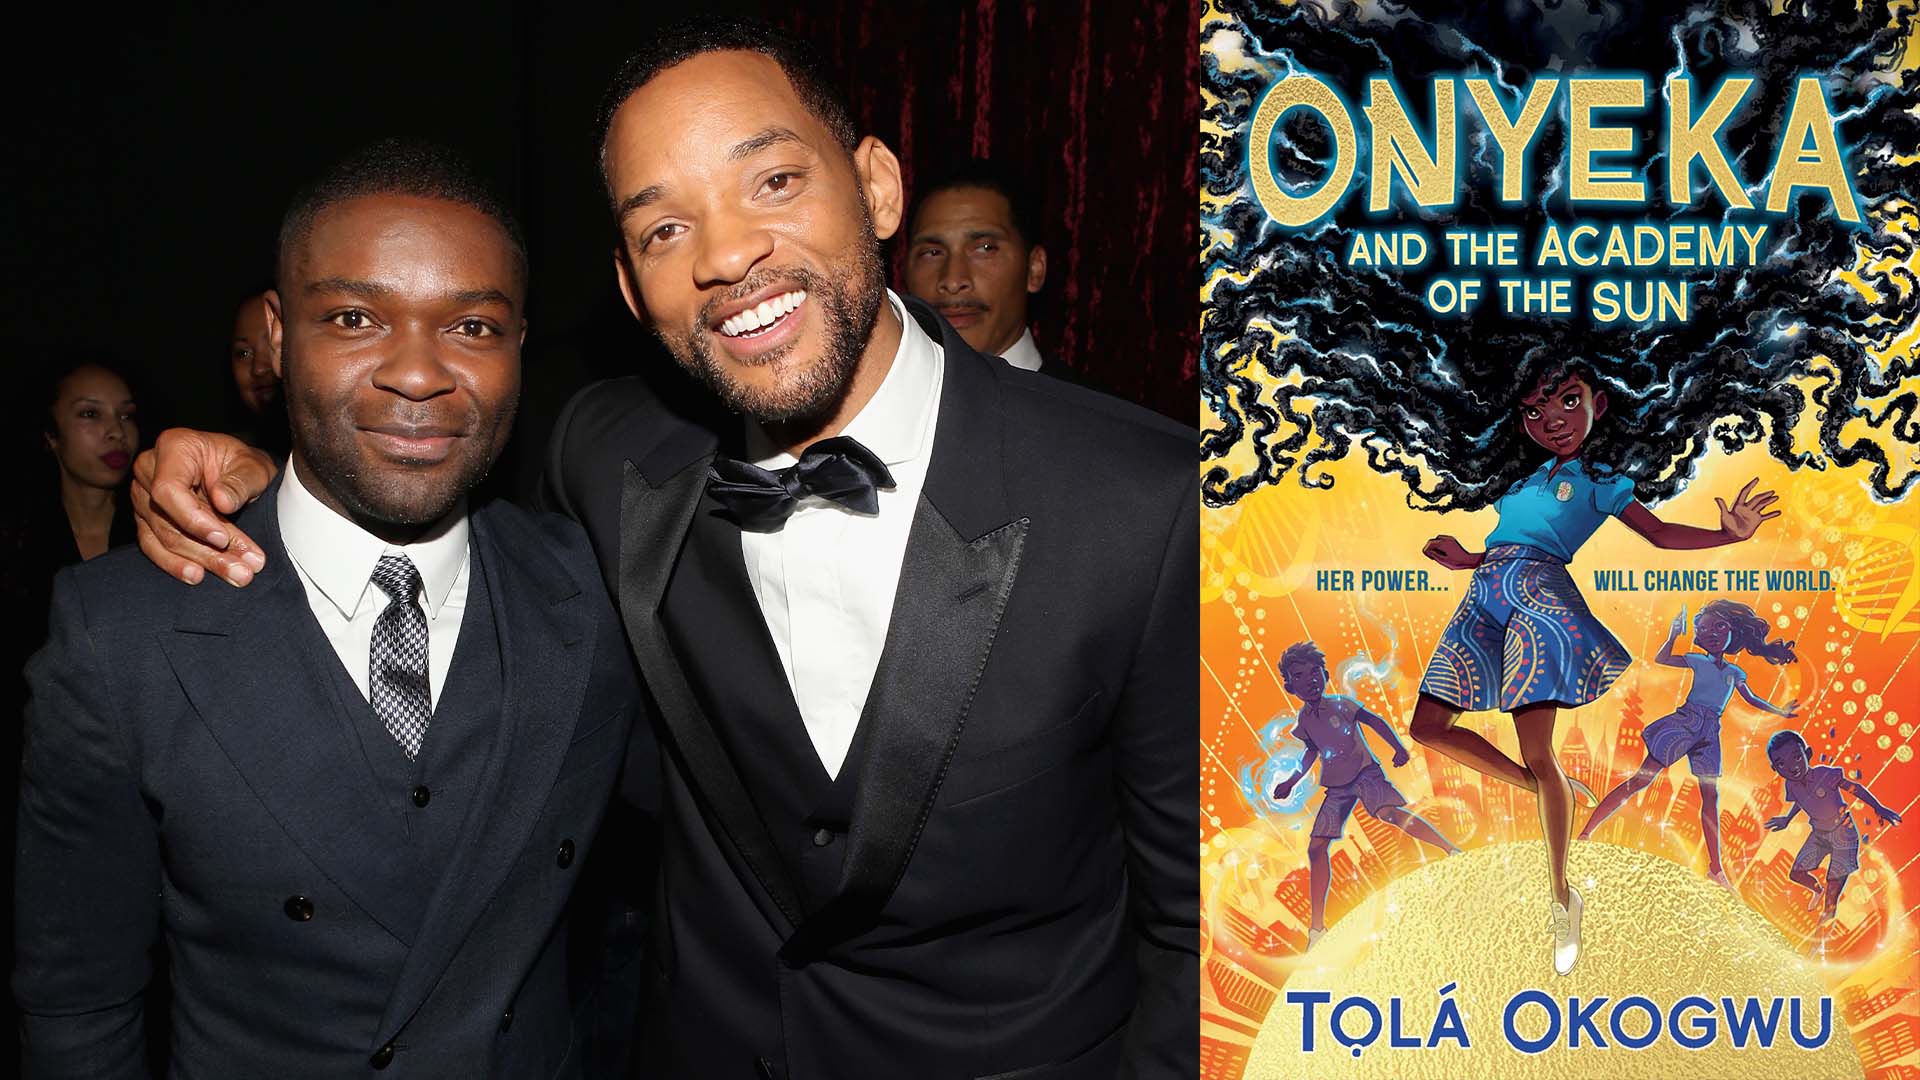 Will Smith & David Oyelowo set ‘Black Panther meets X-Men’ project ‘Onyeka and the Academy of the Sun’